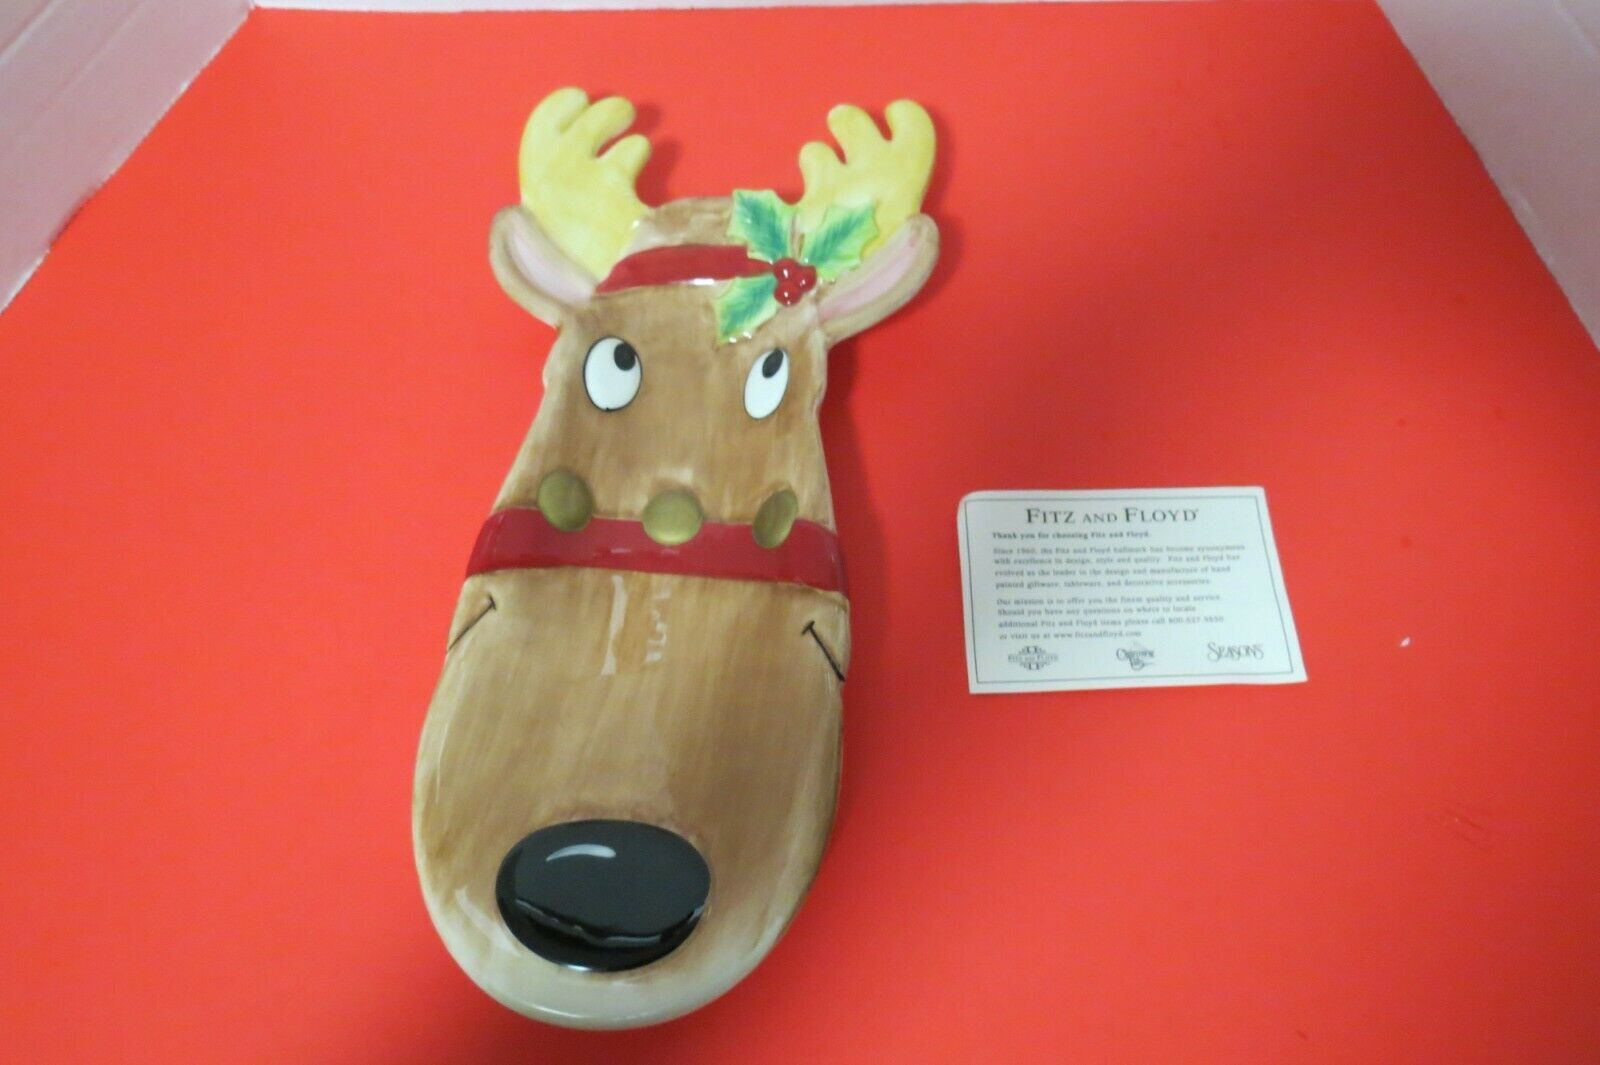 Fitz And Floyd Reindeer Server Tray 2005 Snack Therapy Ceramic In Original Box - $19.75